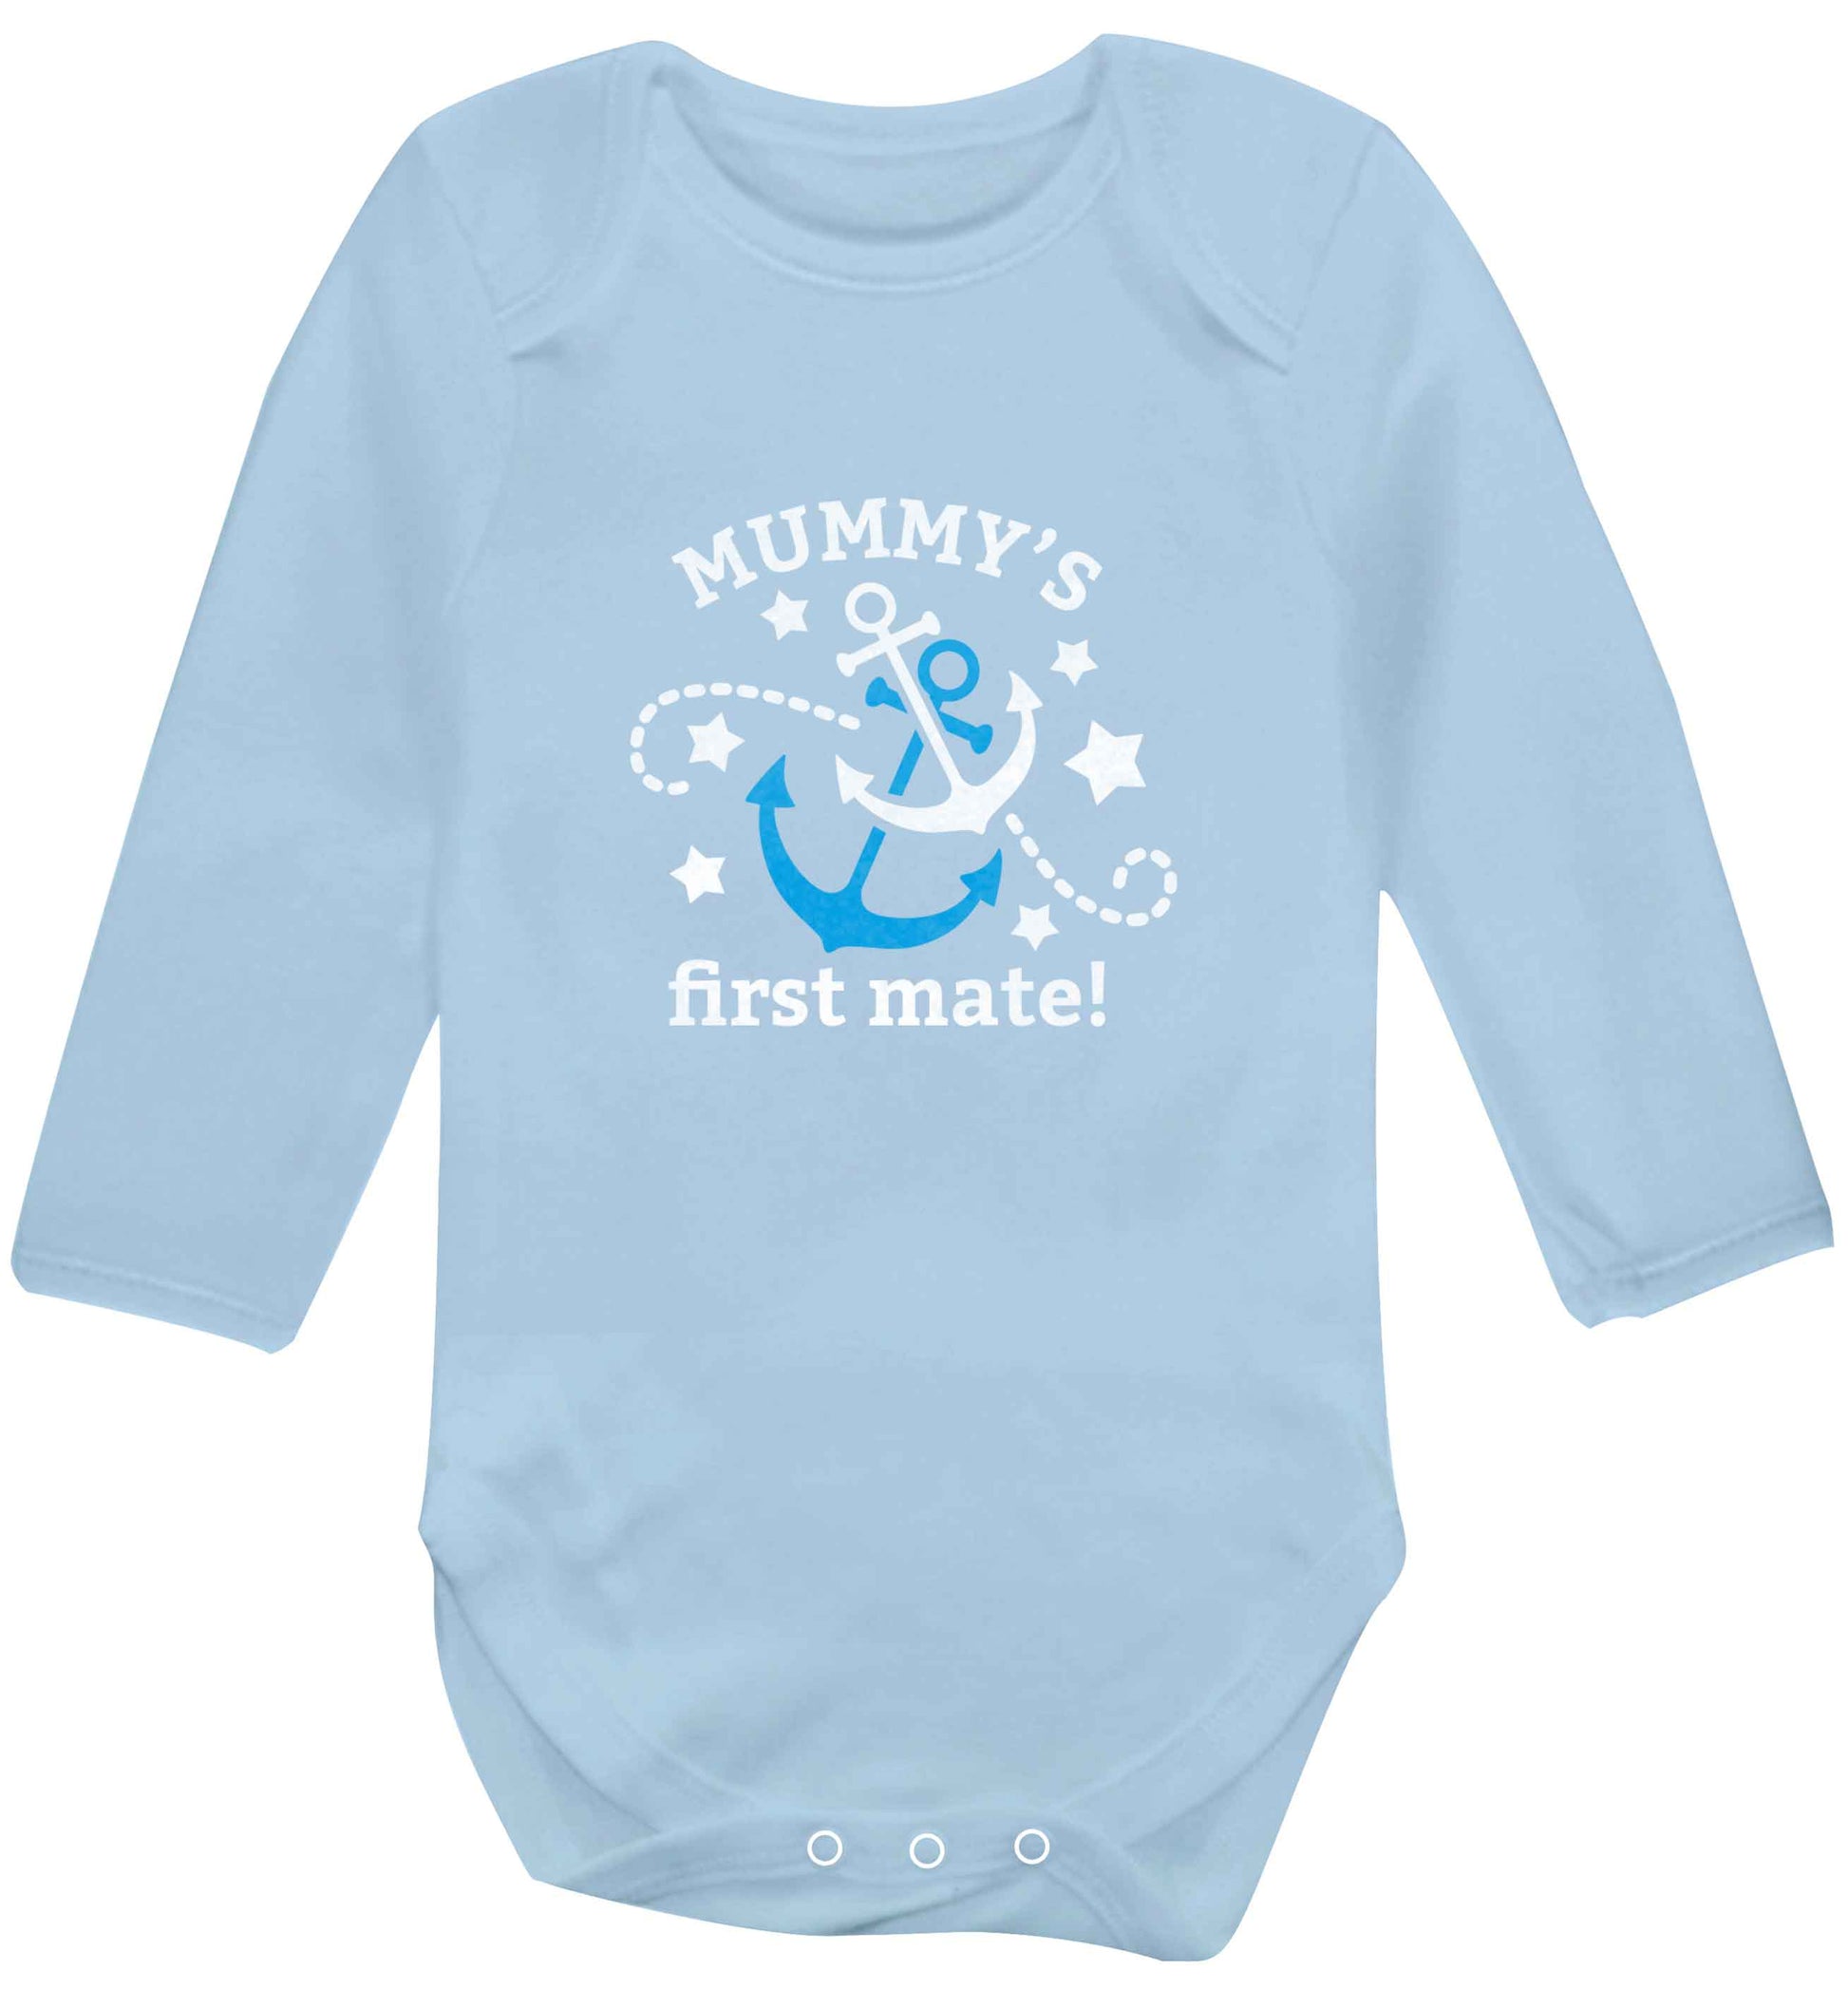 Mummy's First Mate baby vest long sleeved pale blue 6-12 months